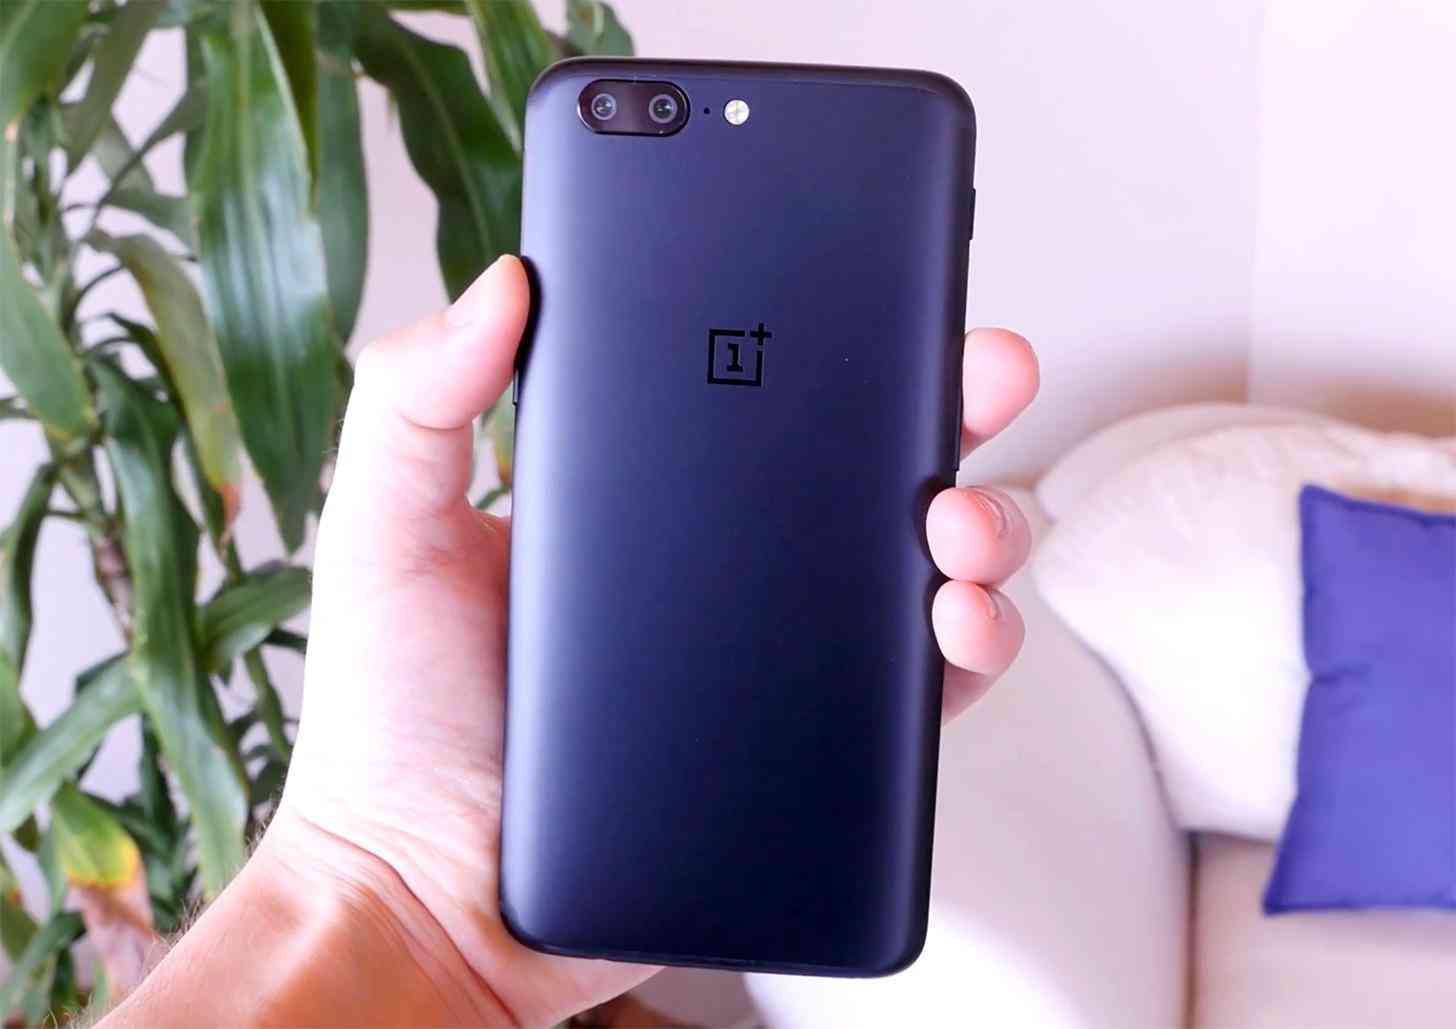 OnePlus 5 hands-on photo